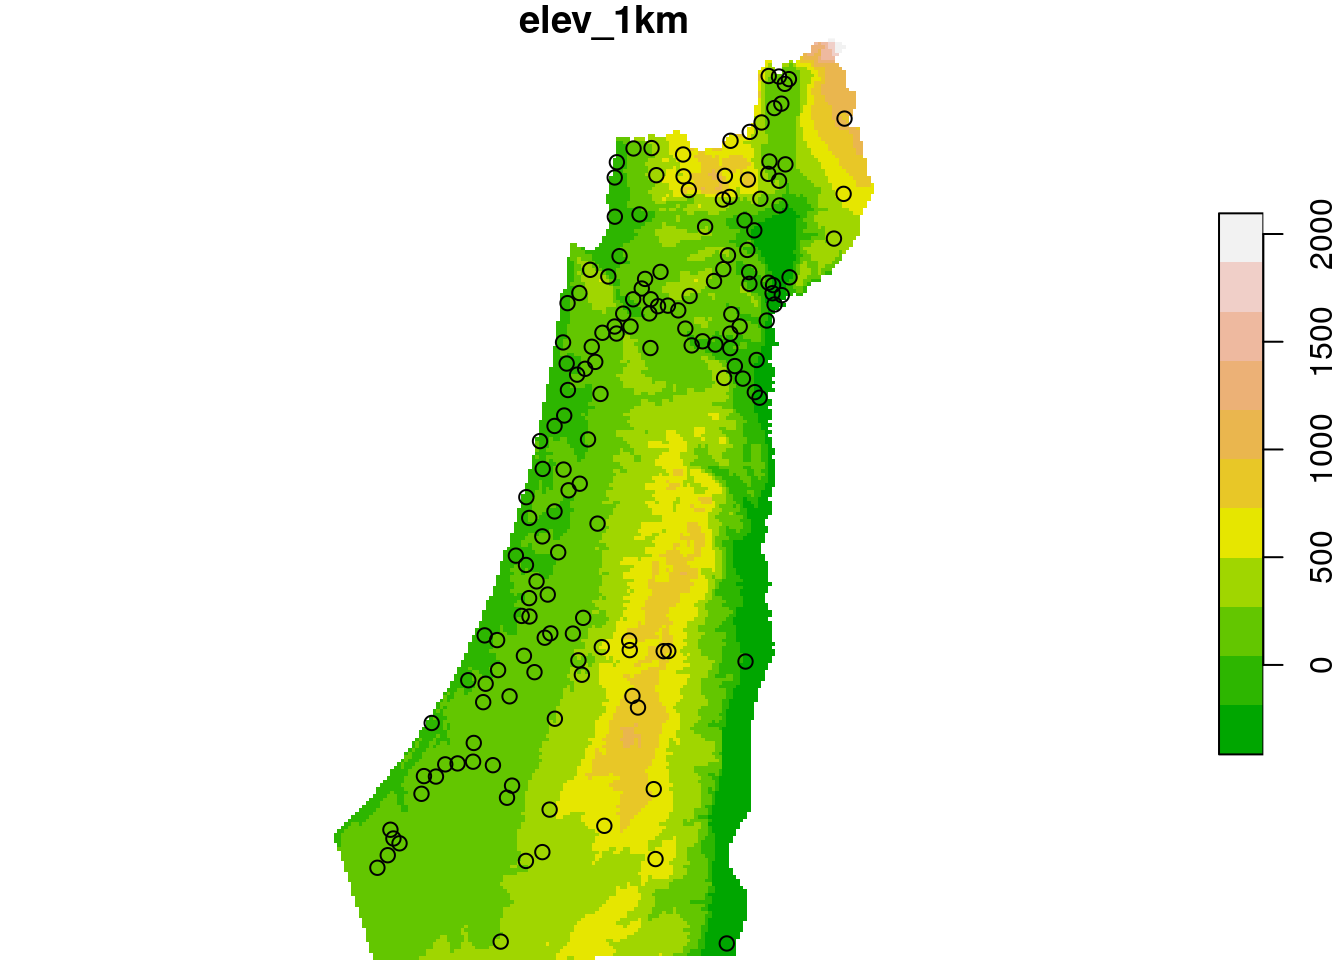 Rainfall data points and elevation raster